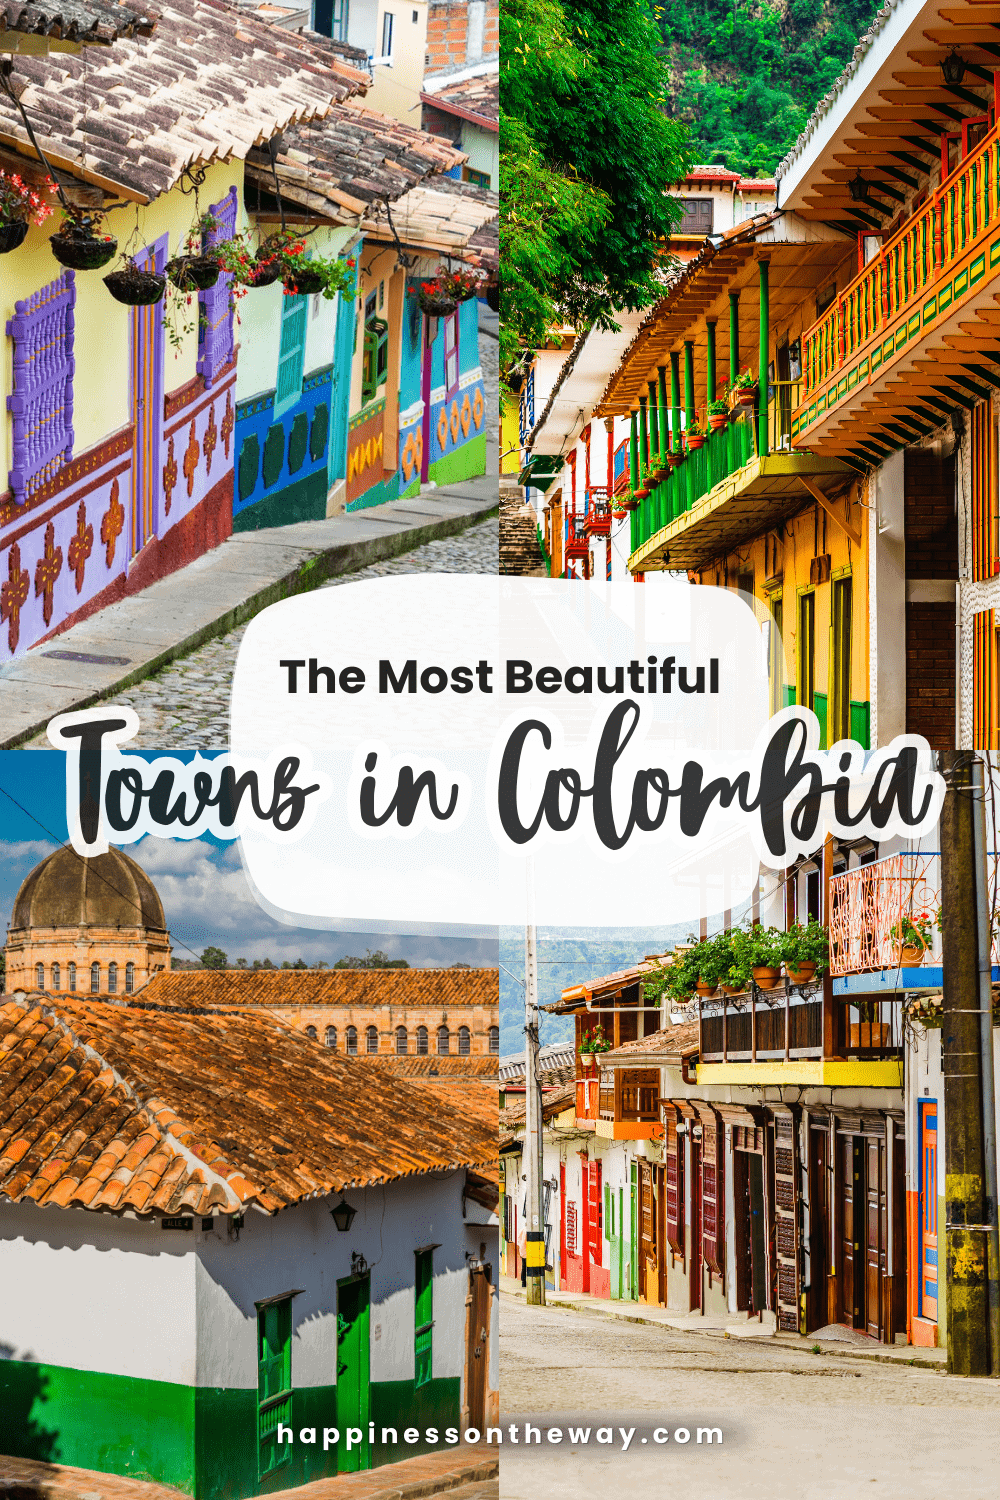 The Most Beautiful Towns in Colombia